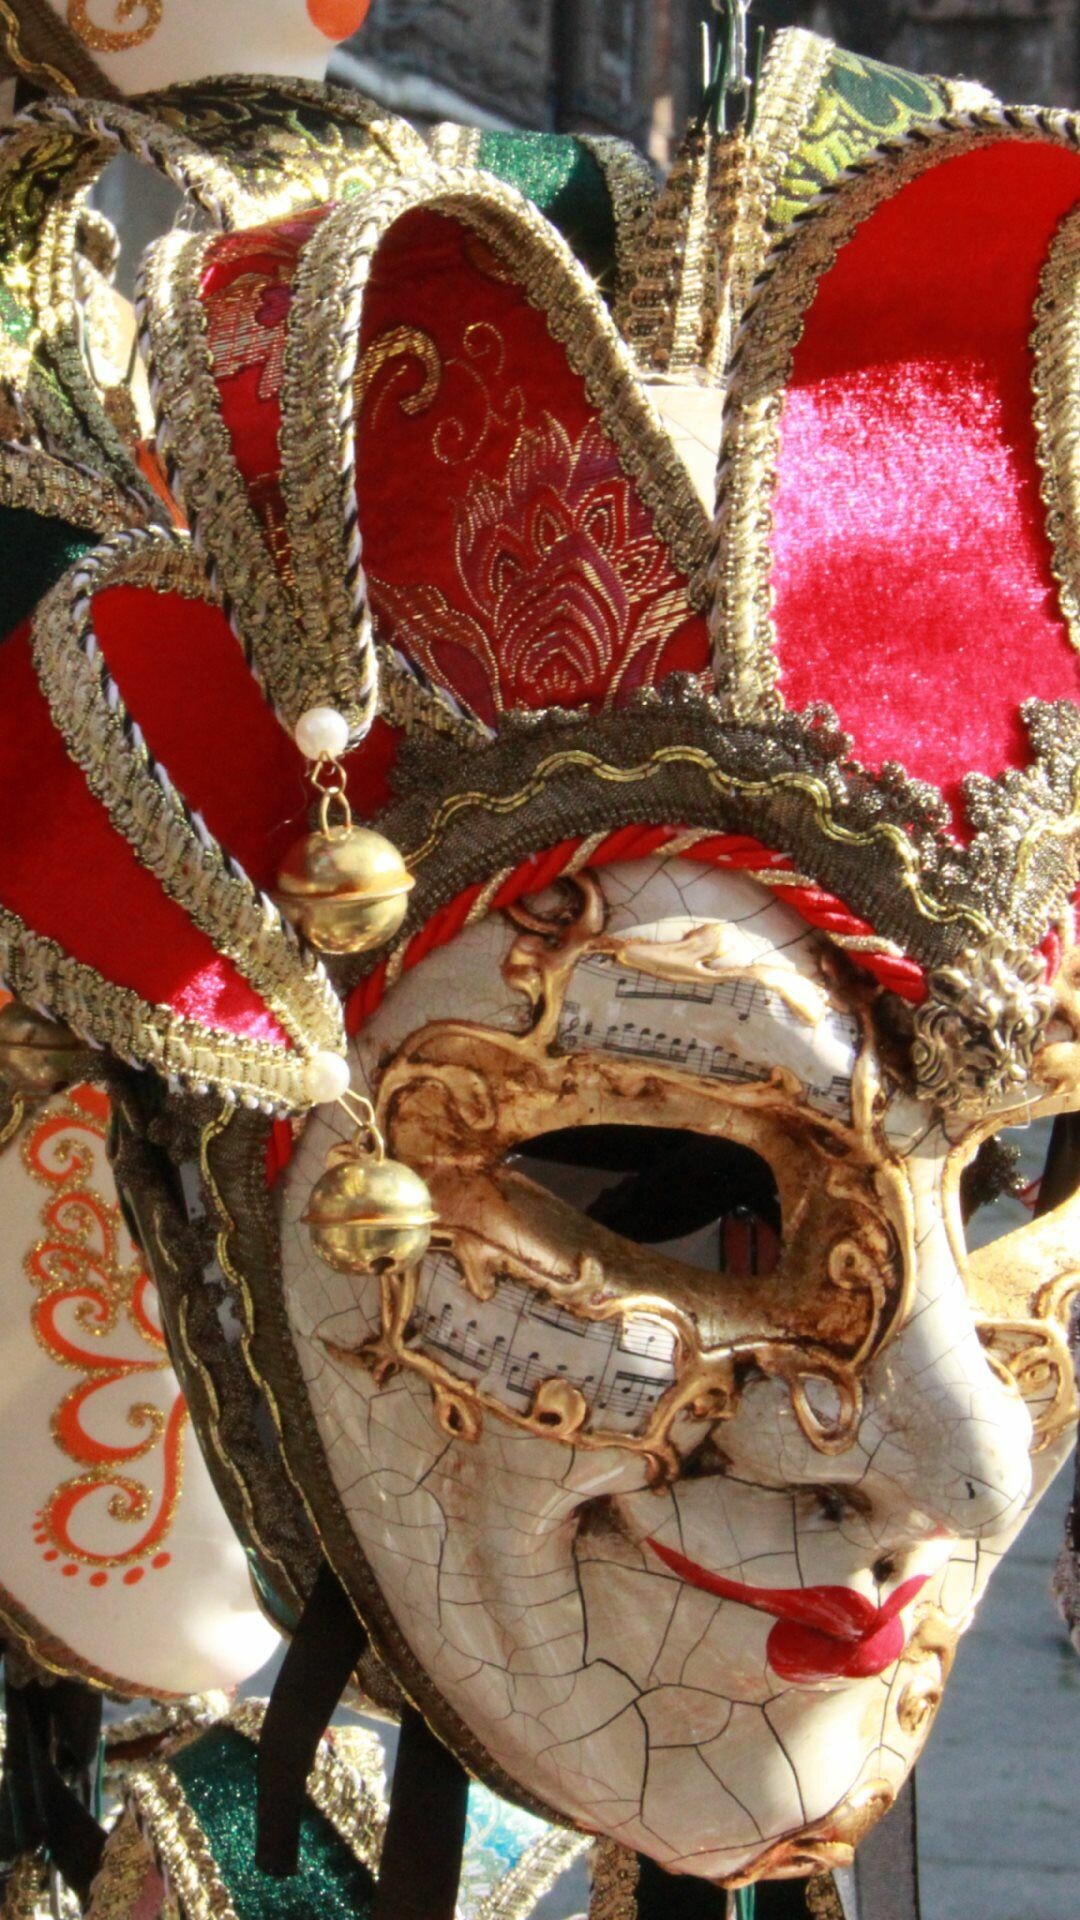 Carnival: Public festival, Elaborate mask, worn to protect the identity of the wearer. 1080x1920 Full HD Wallpaper.